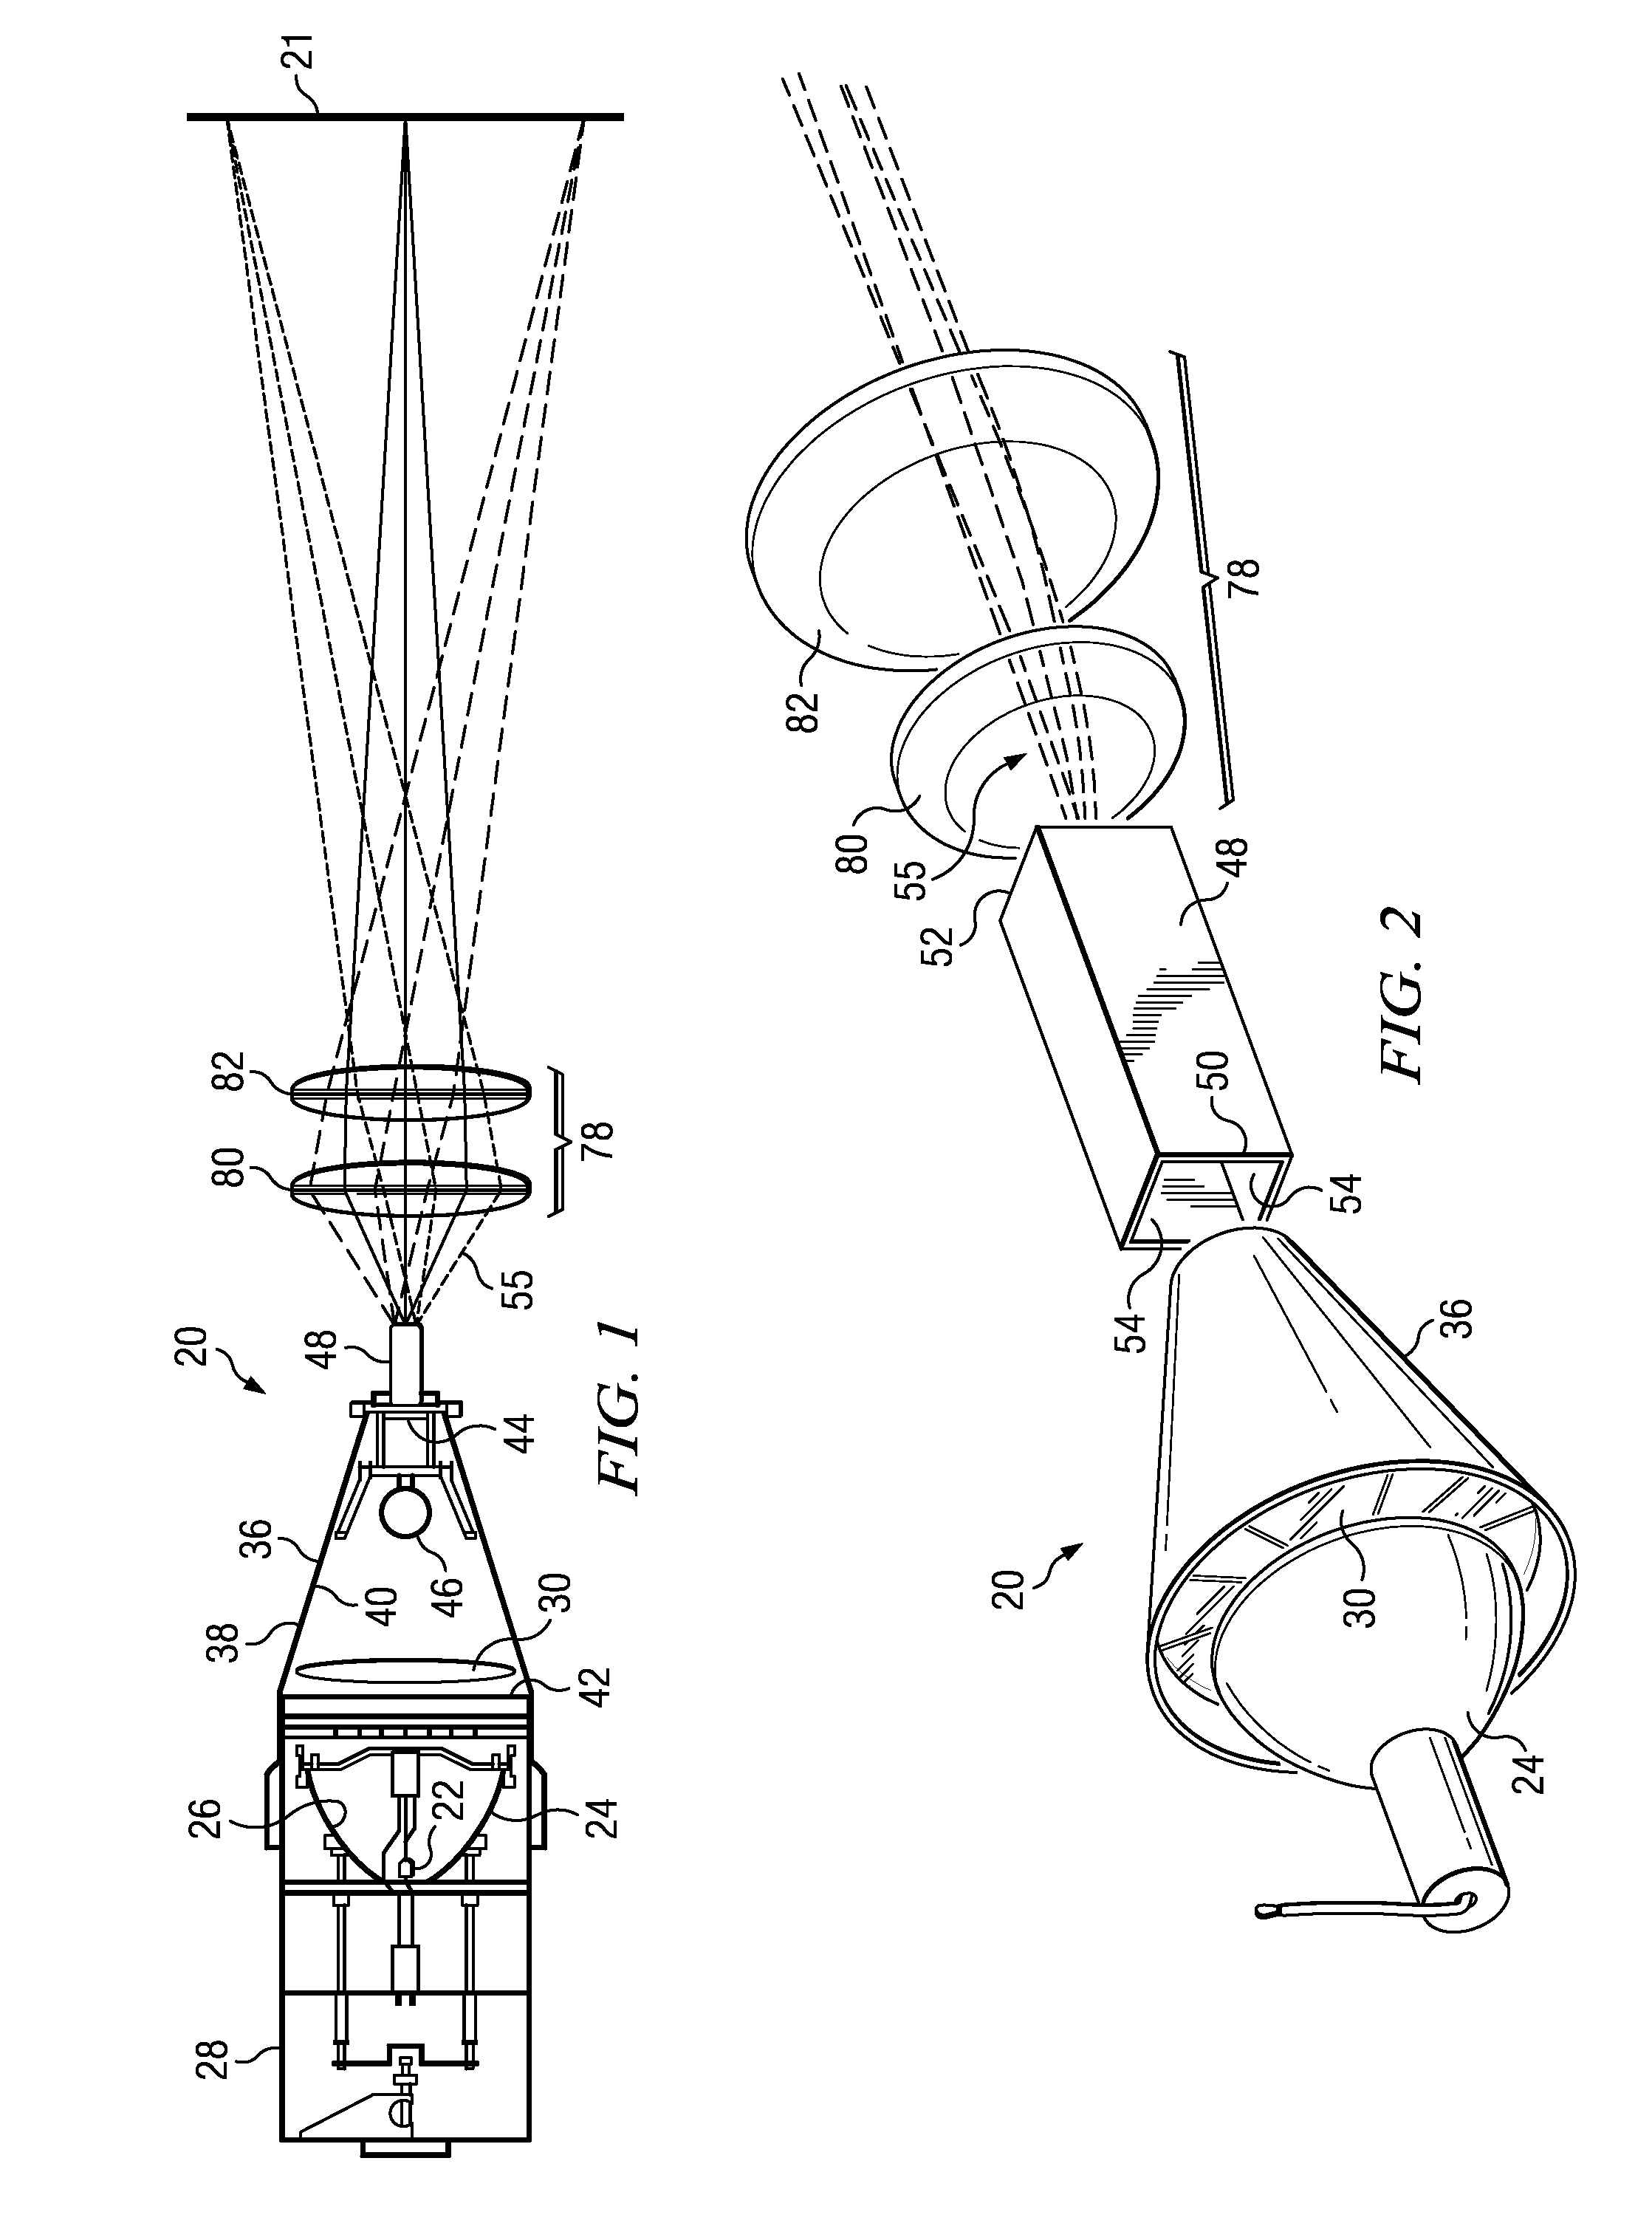 Optical Source Assembly Suitable for Use as a Solar Simulator and Associated Methods